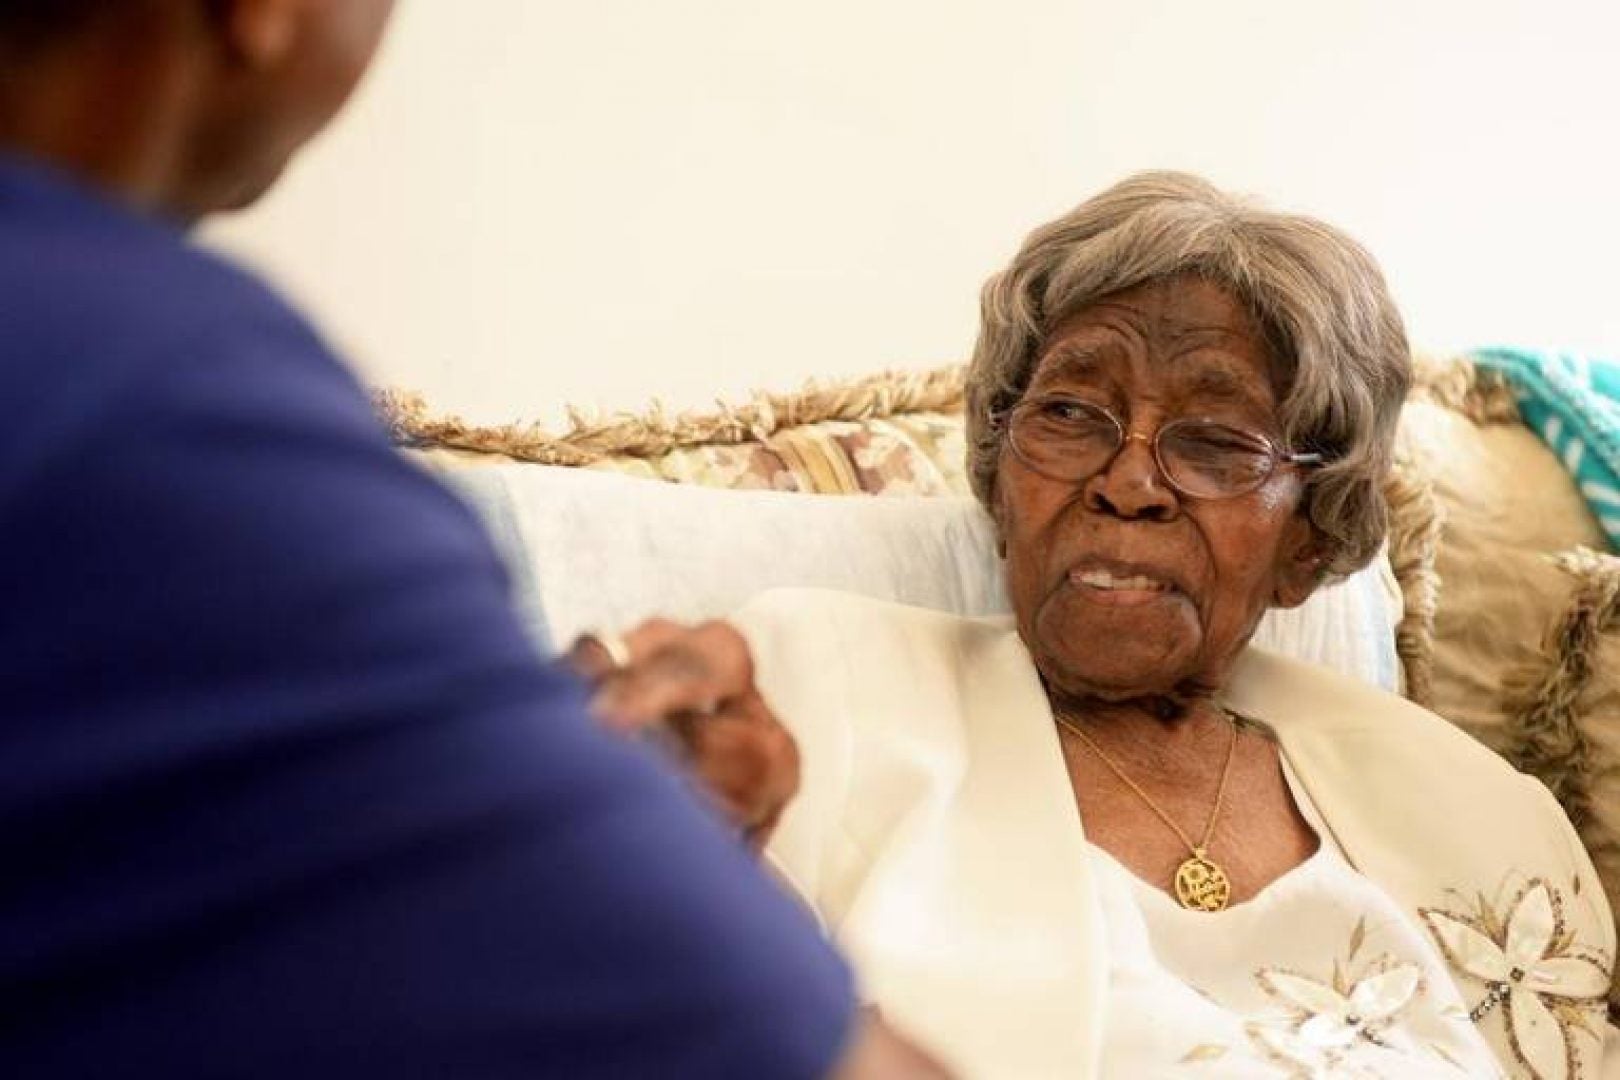 Mother Hester McCardell Ford, The Oldest Living American, Has Died At 116